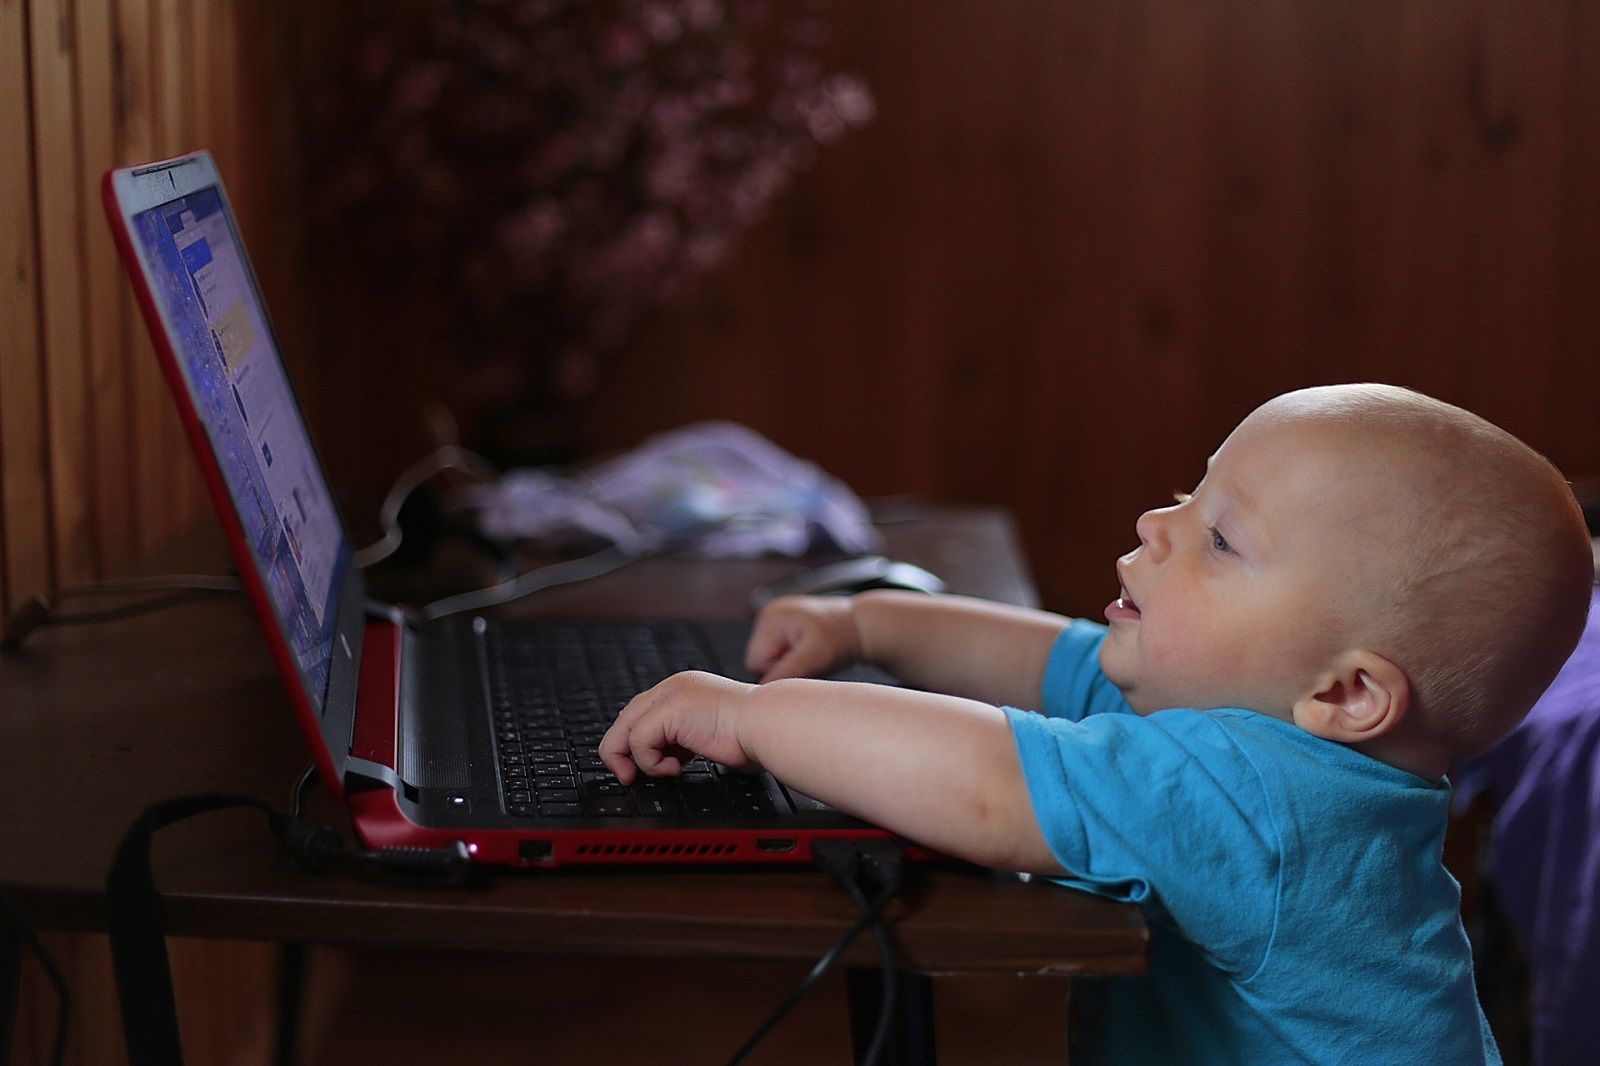 UK regulators are seeking to better protect childrens privacy online image 1